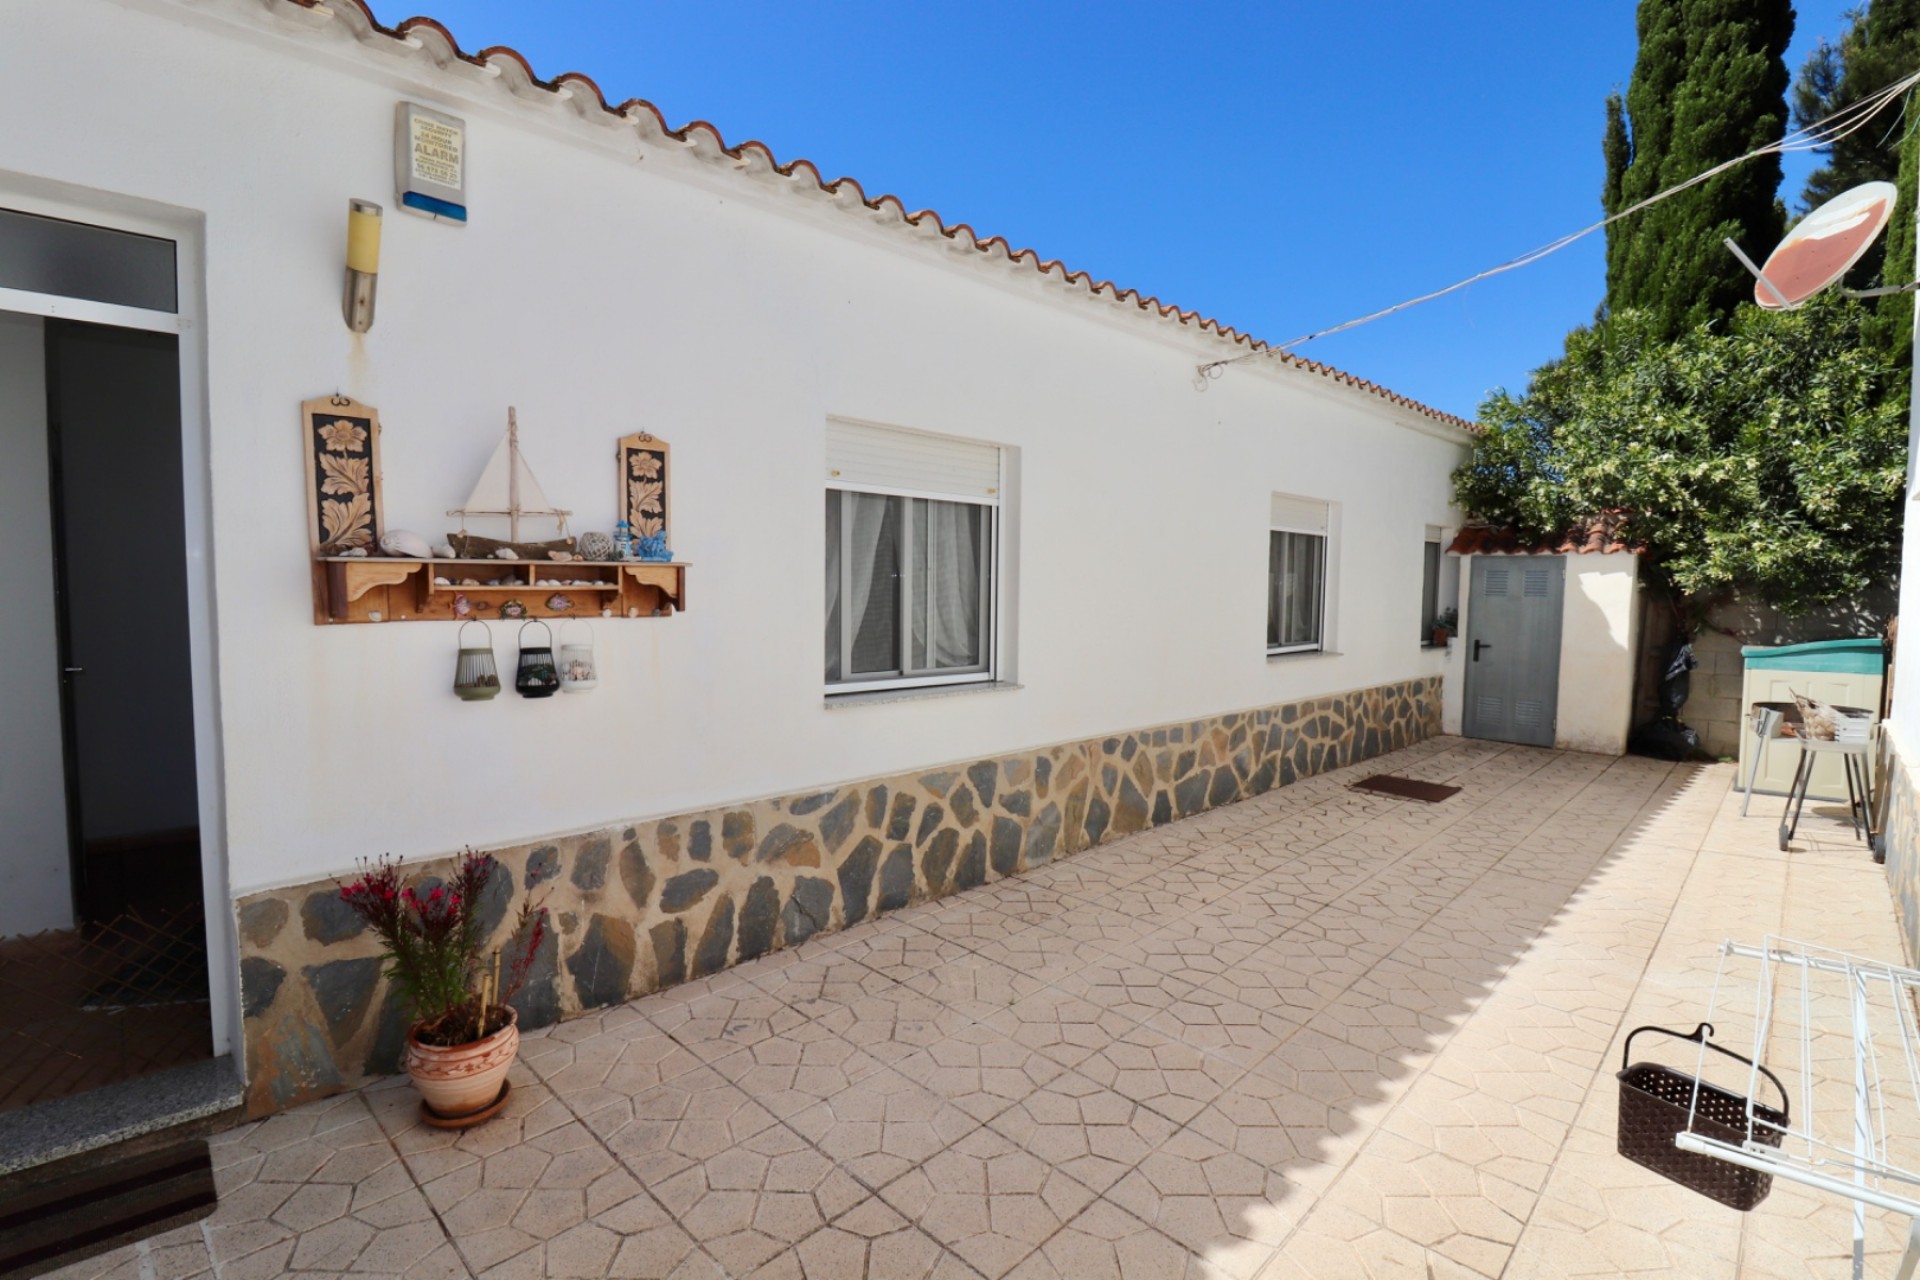 Reventa - Country House -
Dolores